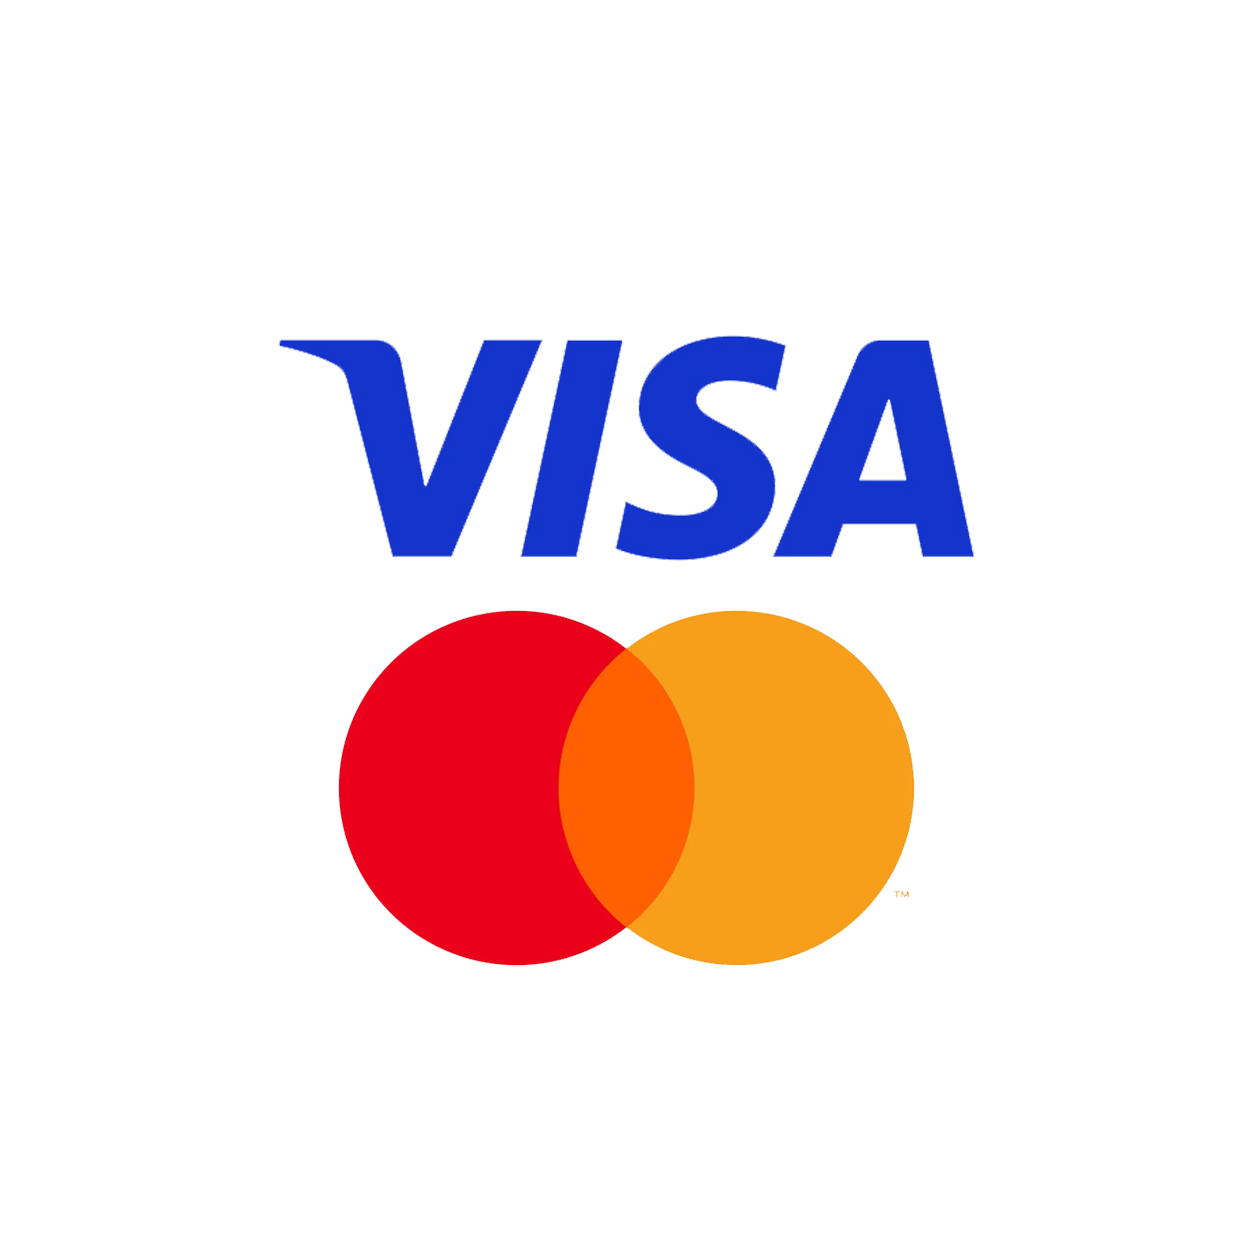 Visa and Mastercard offer widely accepted and secure payment options for online and offline transactions.